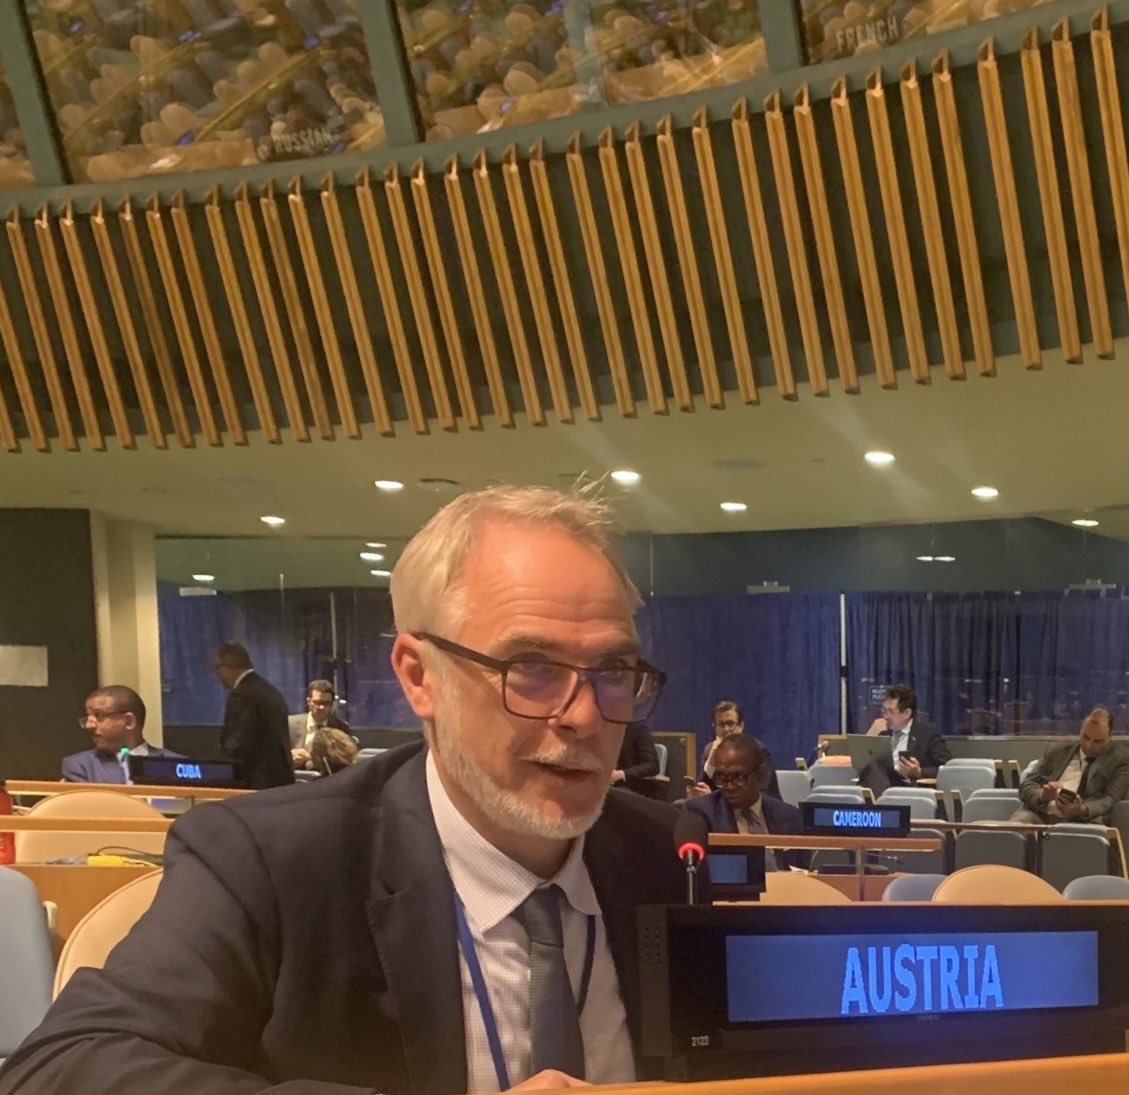 After 4 weeks of intense negotiations, #Austria regrets another #NPTRevCon without substantive agreement due to RU. The draft was very disappointing, yet not surprising - given little agreement on any issue by #nuke #possessors - except no progress on #nuclear #disarmament (1/3)